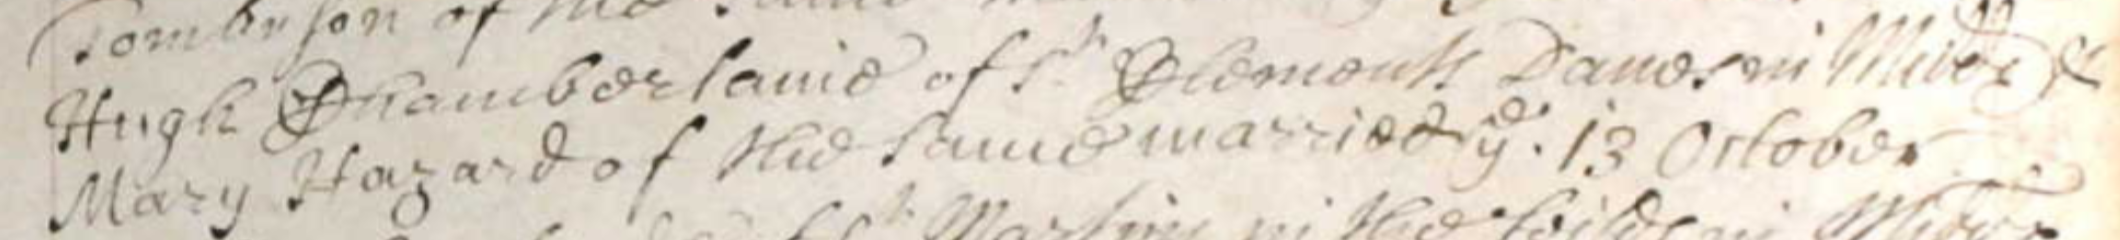 Figure 2: Marriage Register entry for Hugh Chamberlen the younger and Mary Hazard